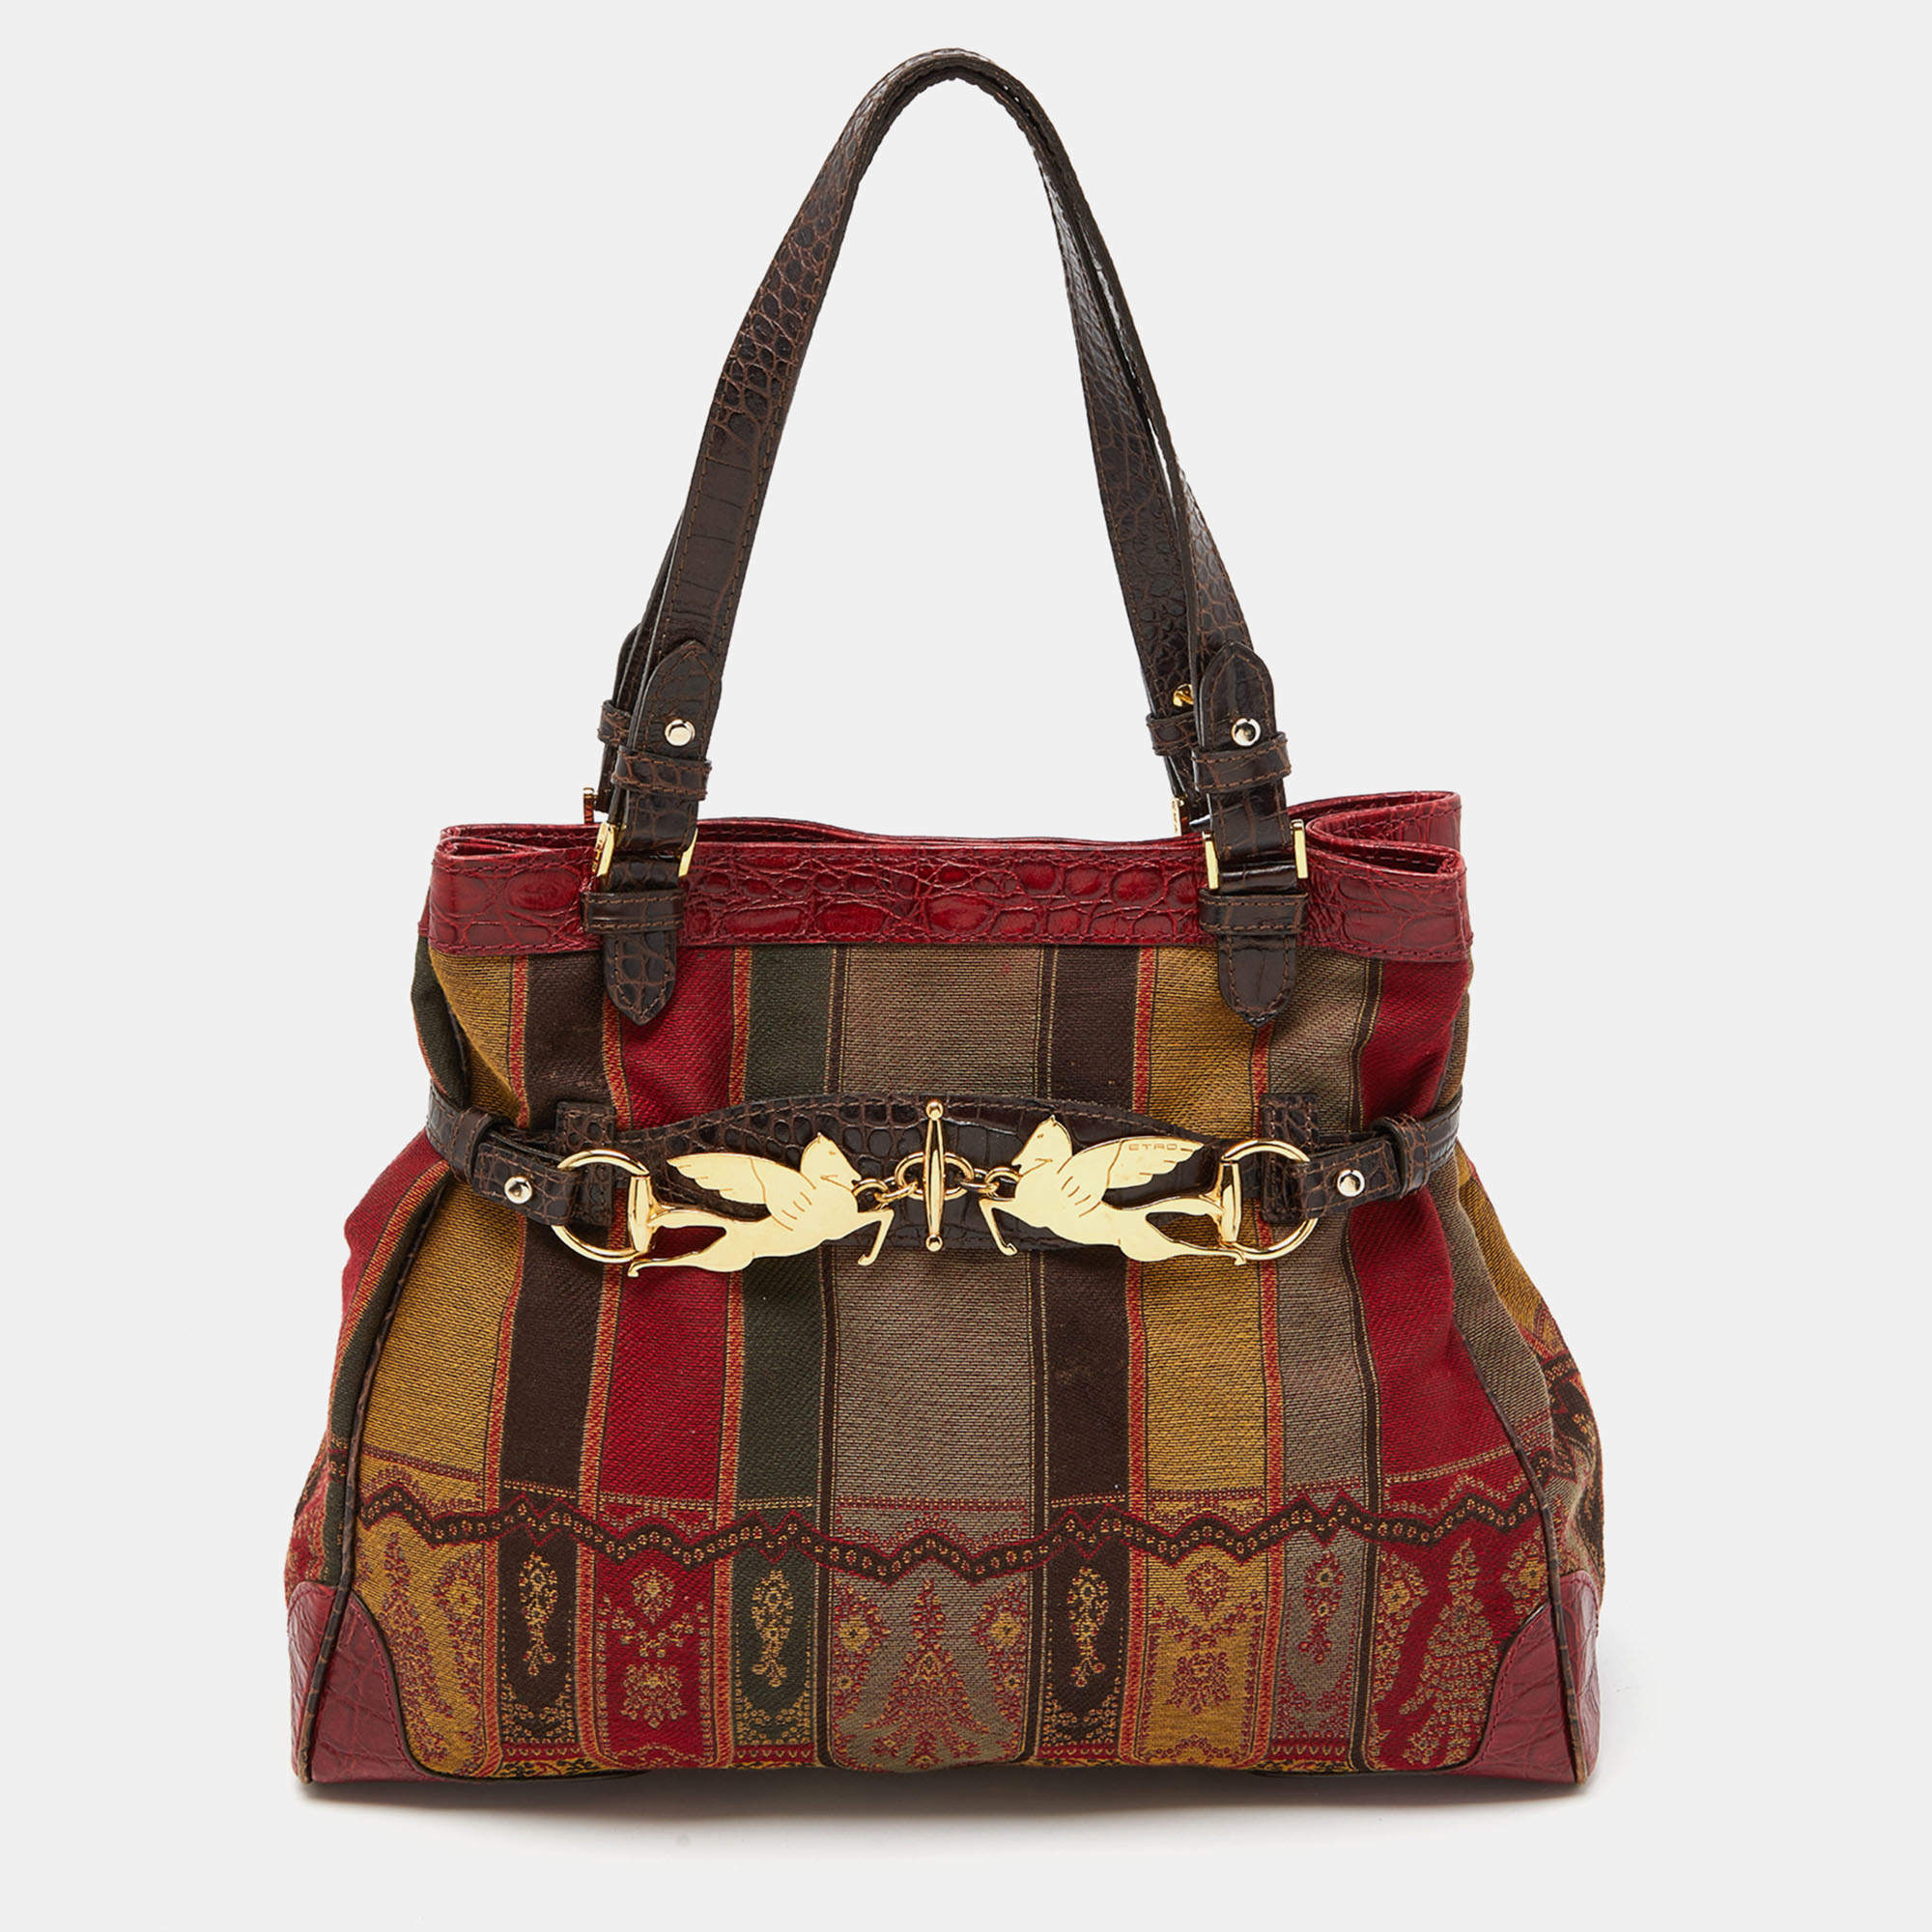 Etro Multicolor Printed Canvas and Croc Embossed Leather Shoulder Bag